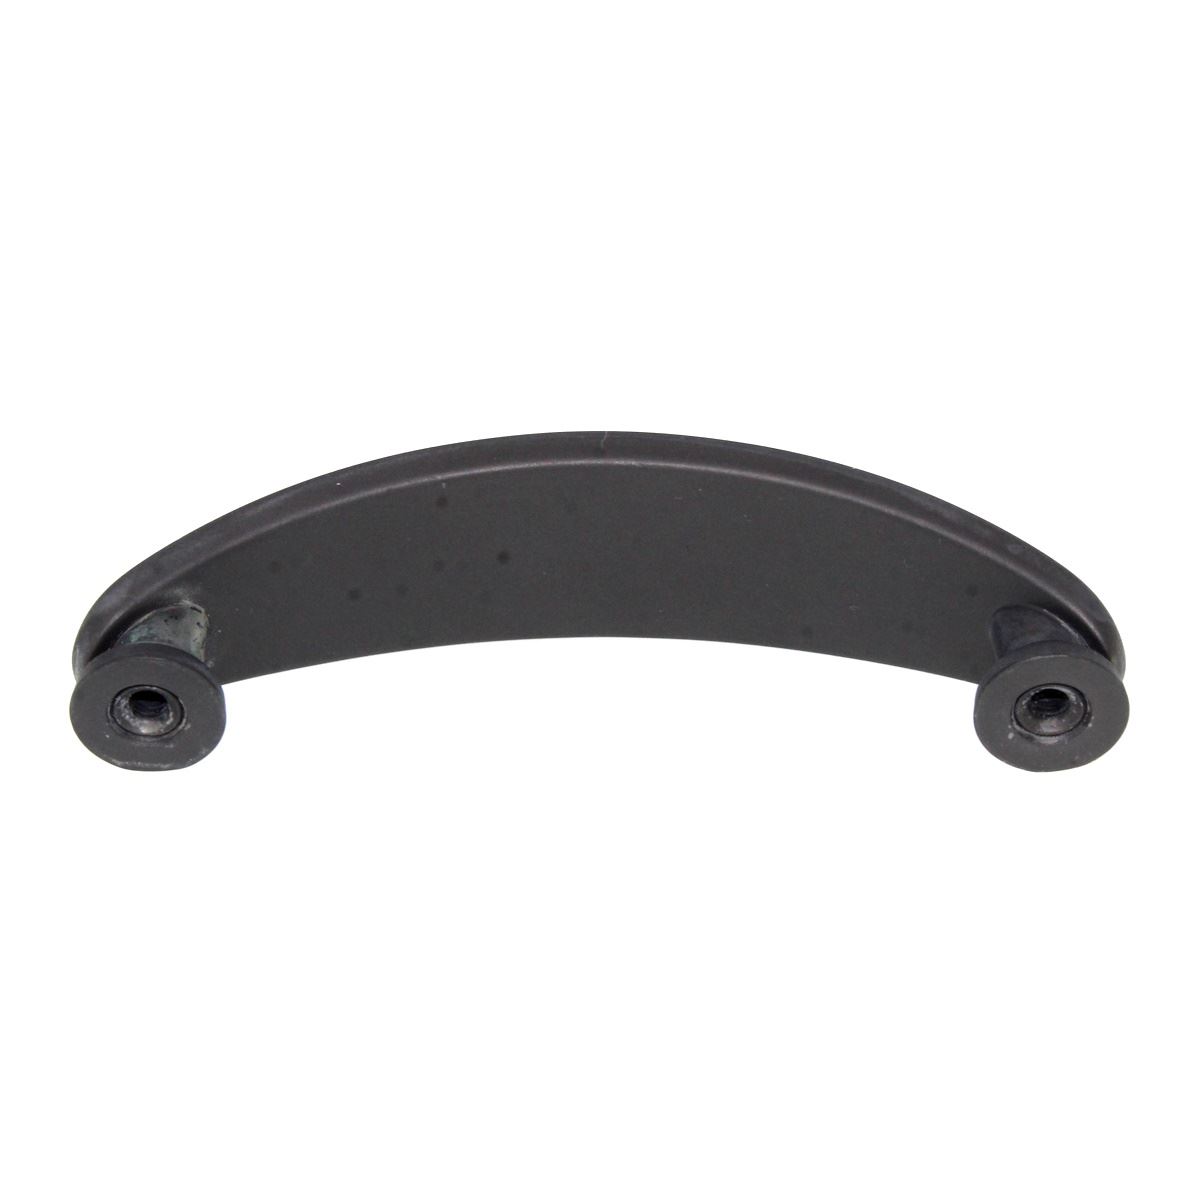 Laurey Churchill 3 1/2" Ctr Cabinet Pull Oil-Rubbed Bronze Black Leather 12397